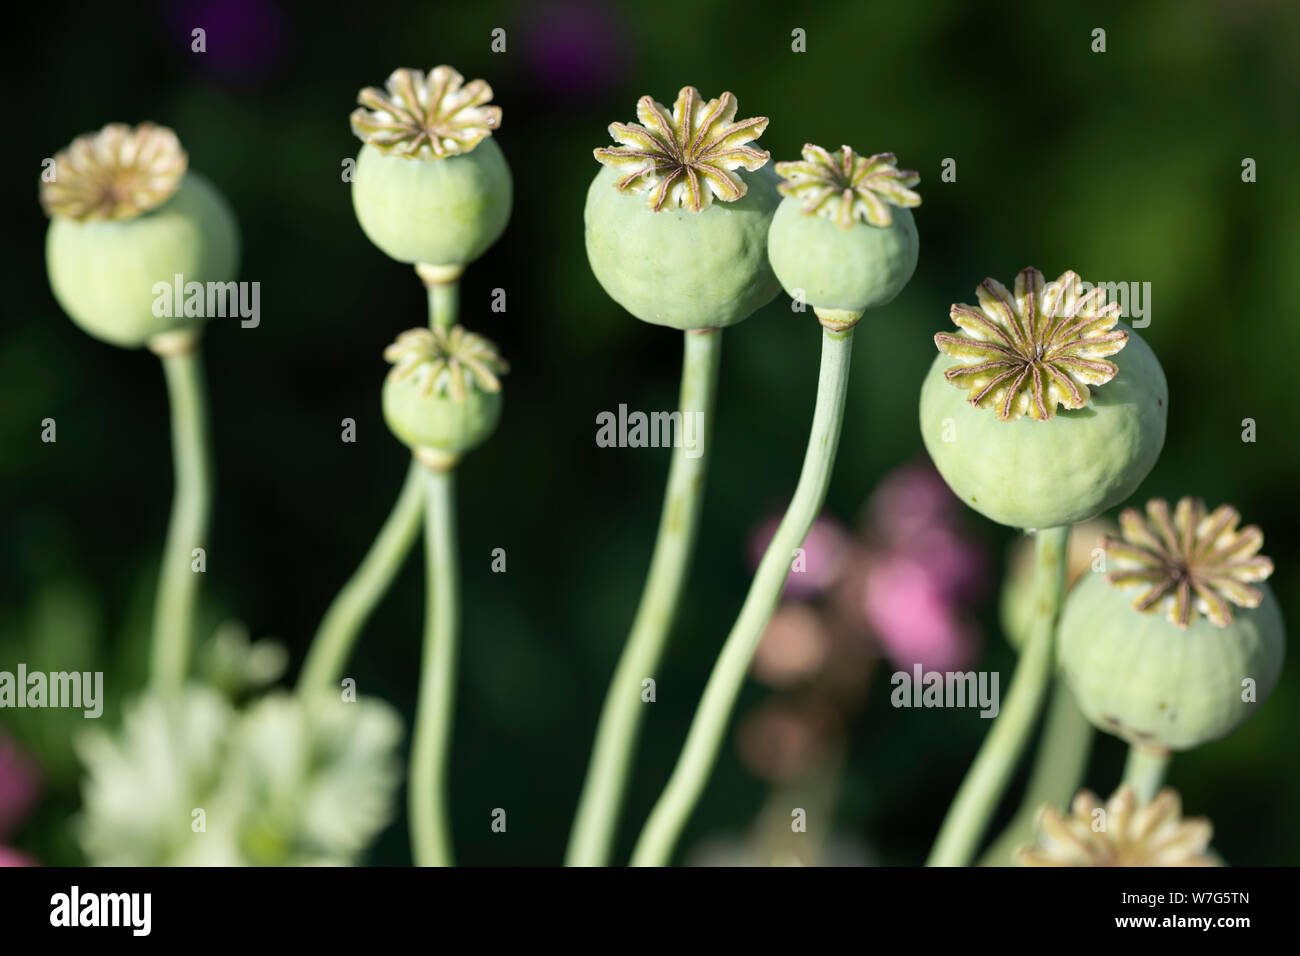 Summer Seed Pods High Resolution Stock Photography and Images - Alamy